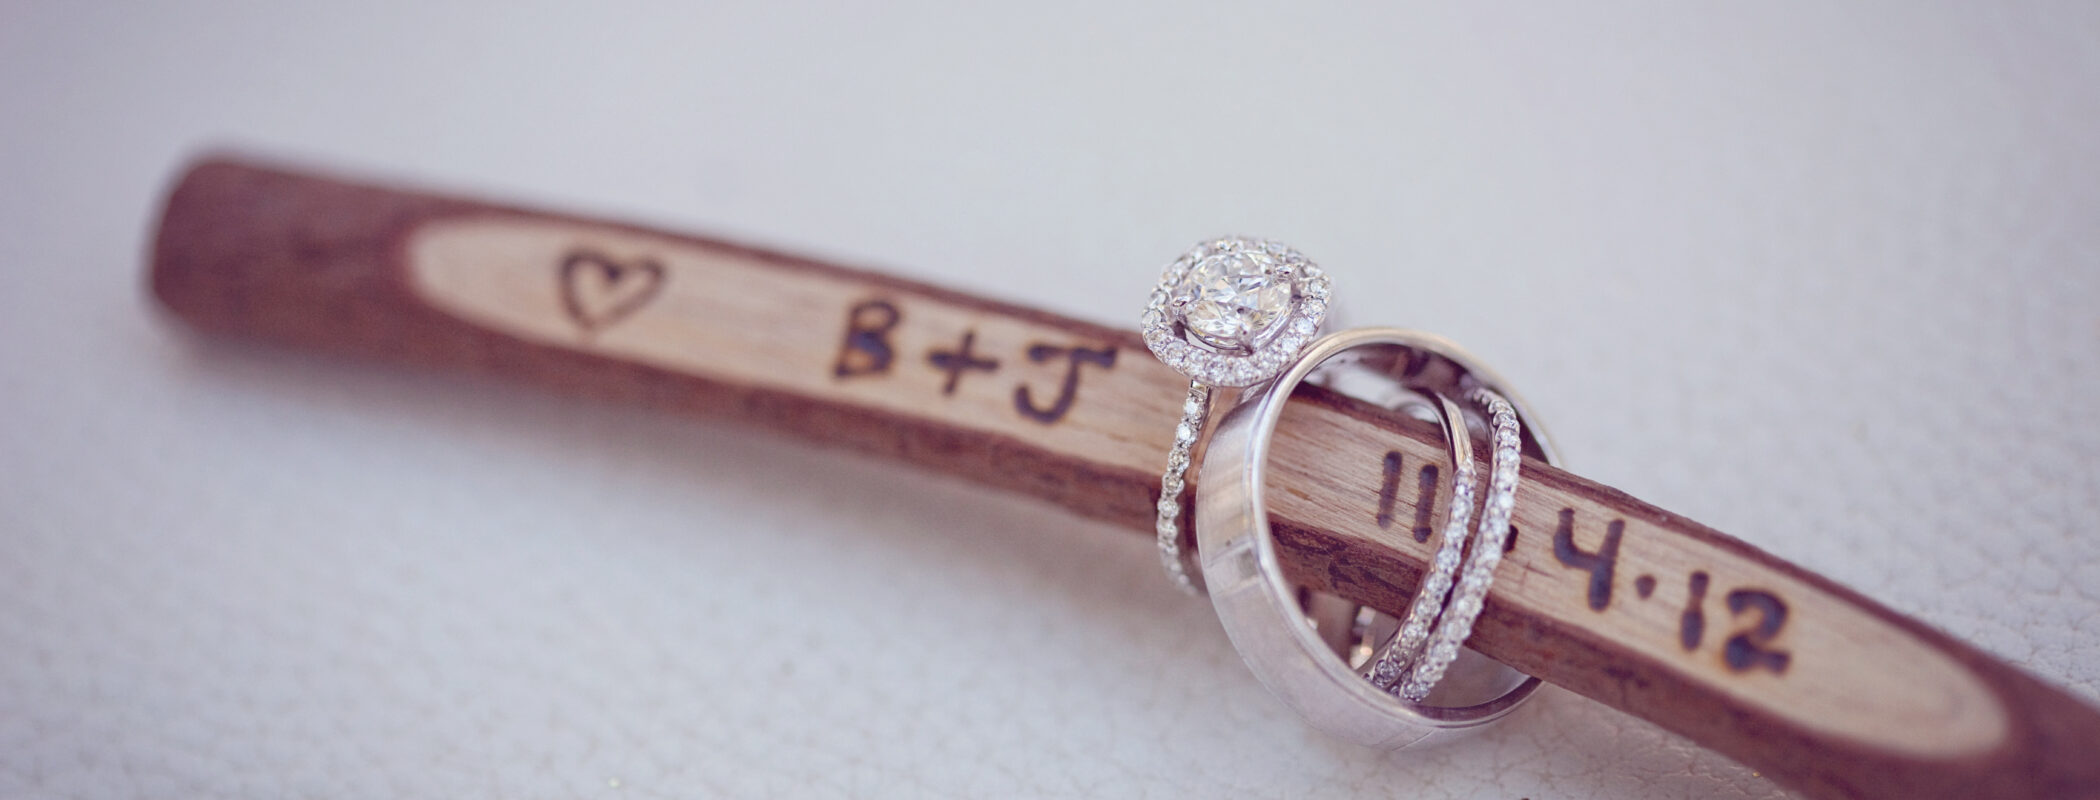 Wedding Rings 101 featured image